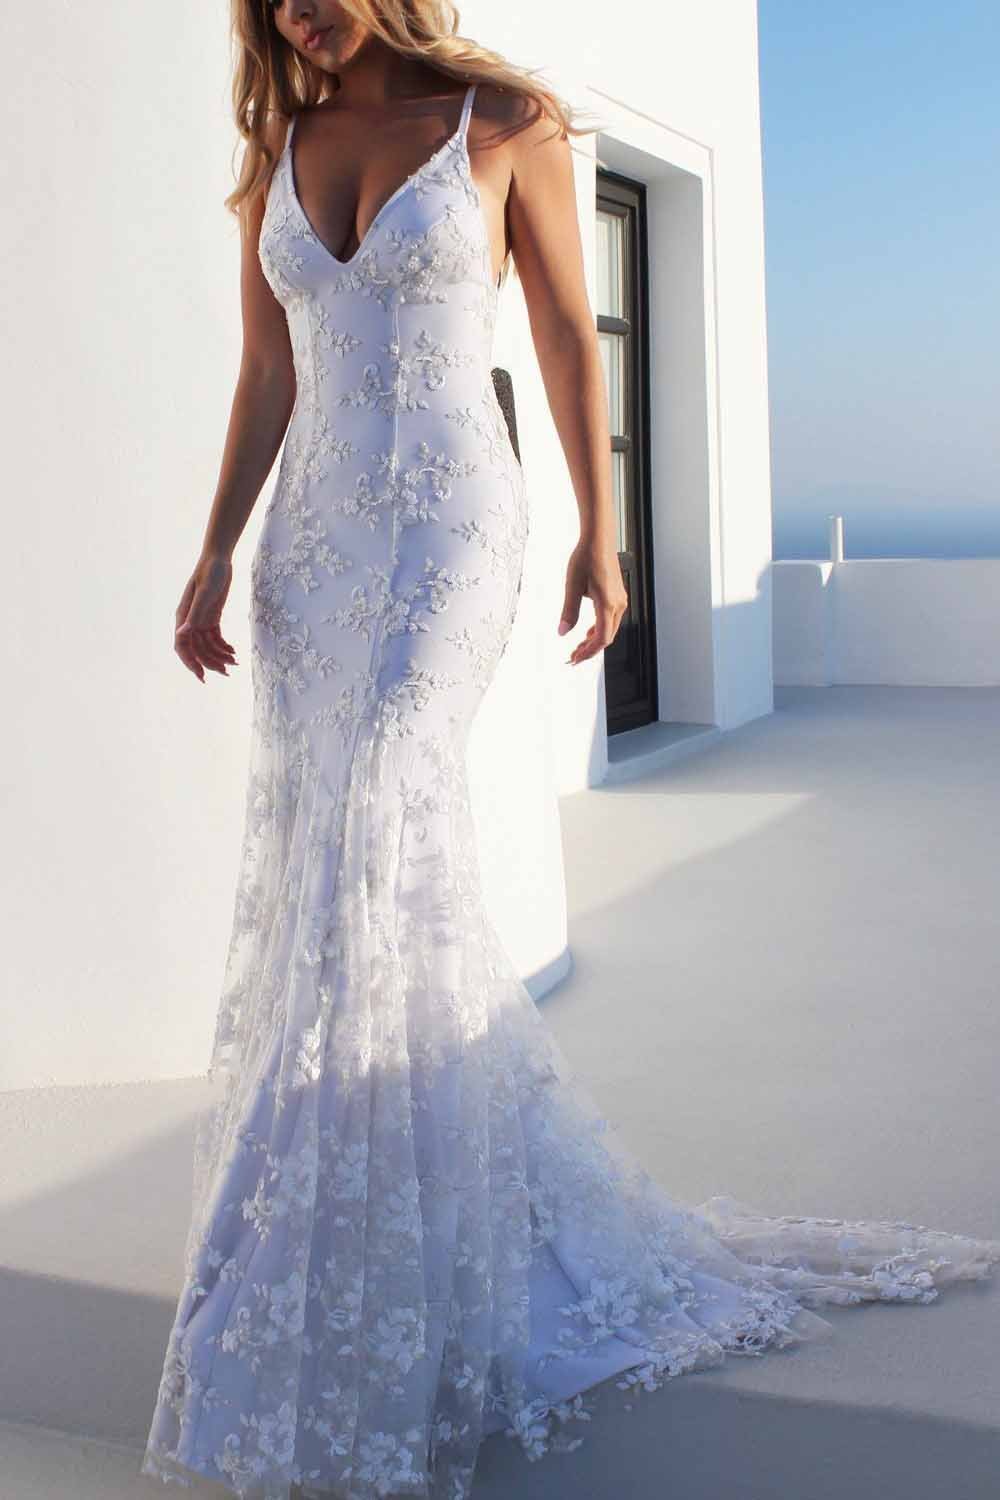 Sexy Backless Off White Mermaid Lace V Neck Wedding Dresses Long Prom Dresses RS354